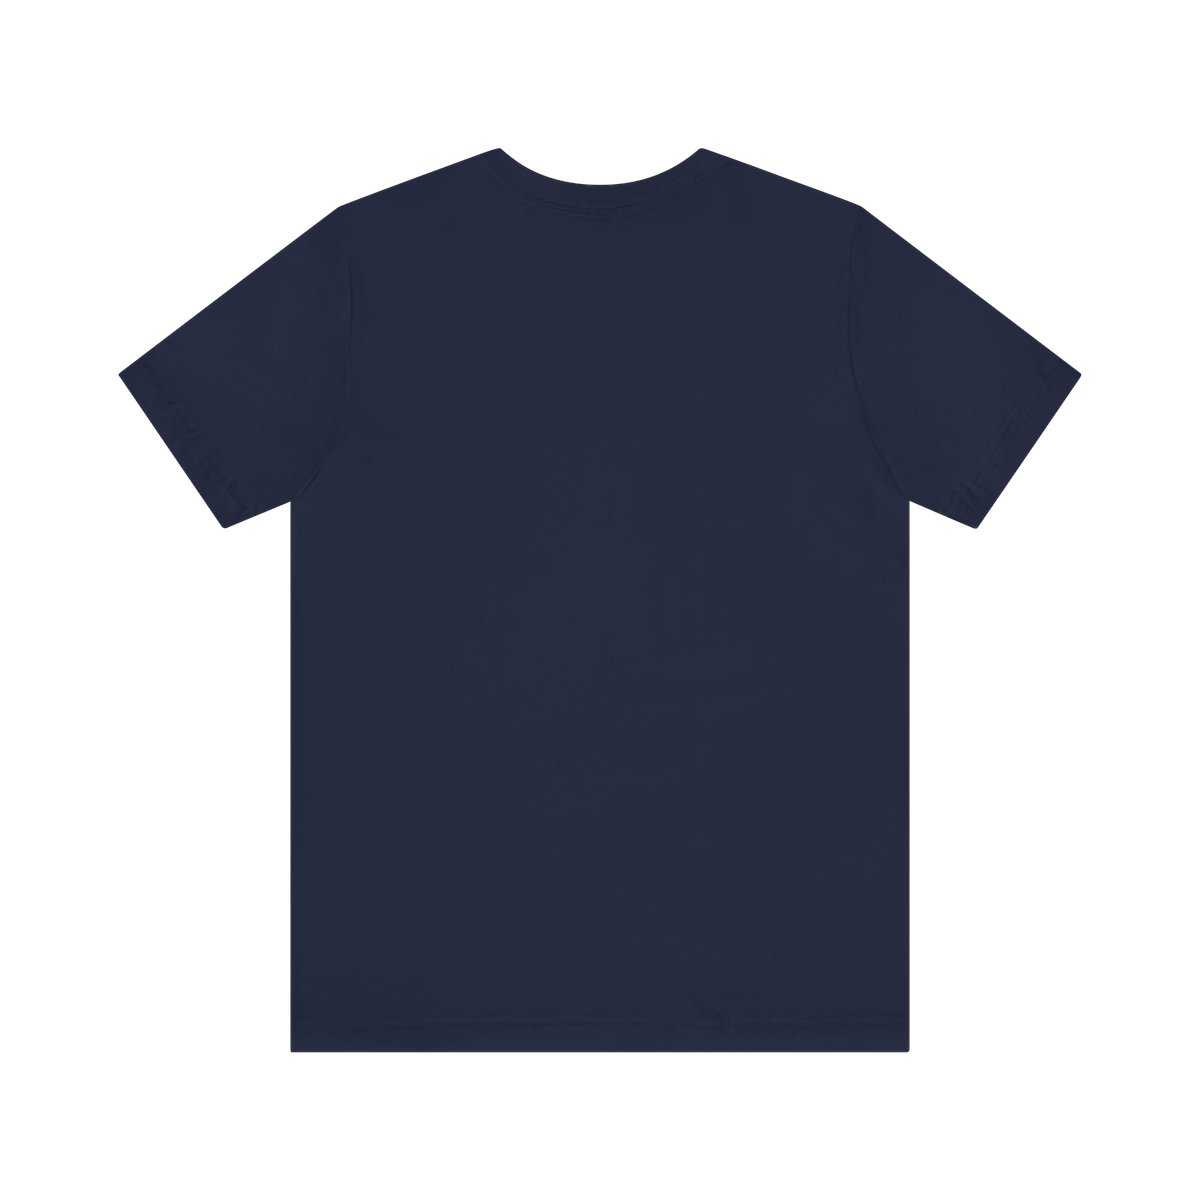 EB Silhouette Unisex Jersey S/S Tee product thumbnail image